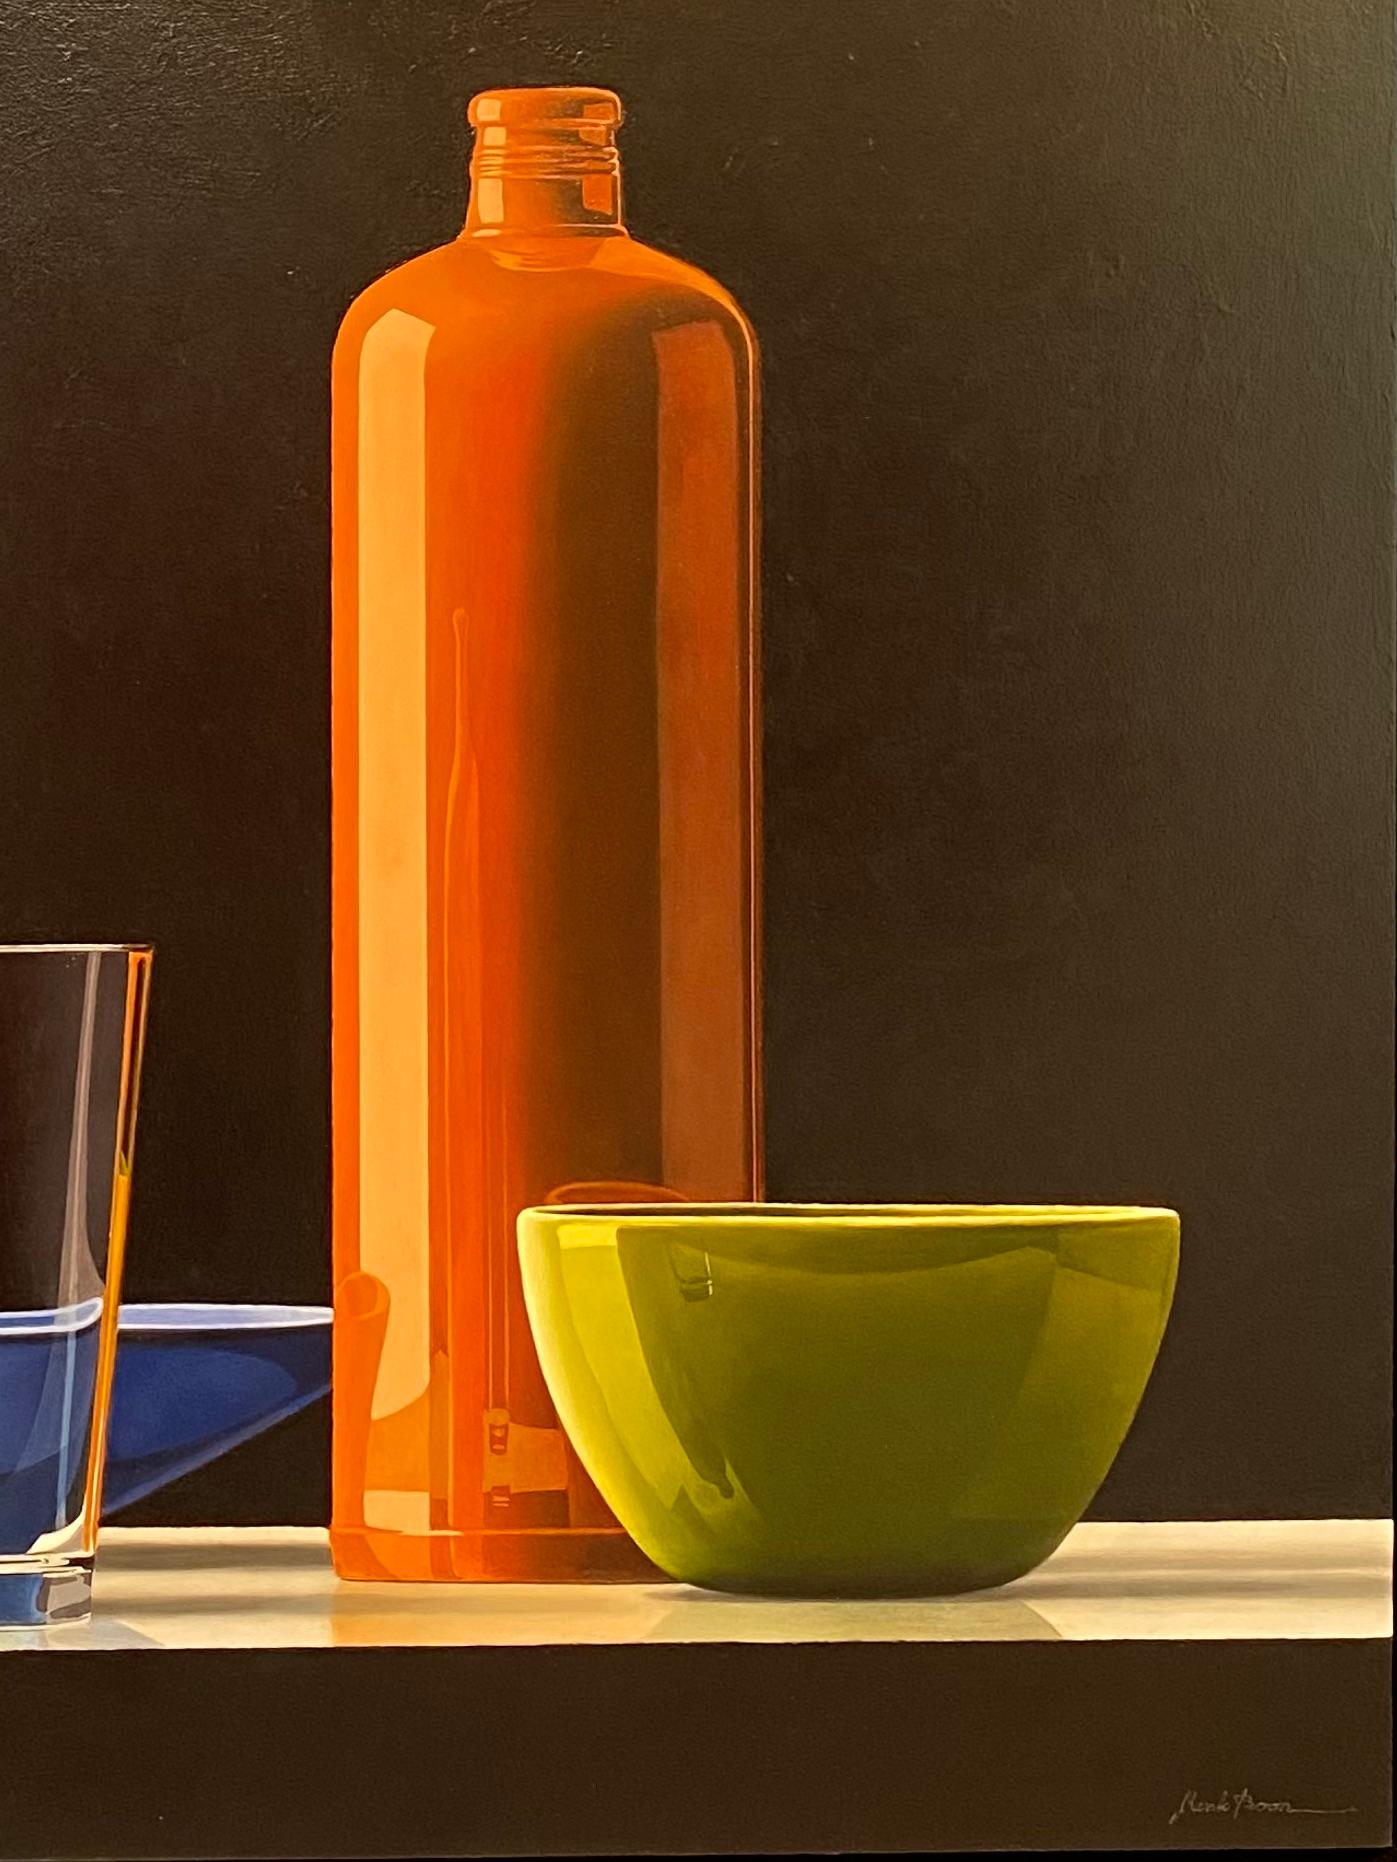 Composition with dish, bowl & glass-21st Century Contemporary Stilllife Painting - Black Still-Life Painting by Henk Boon